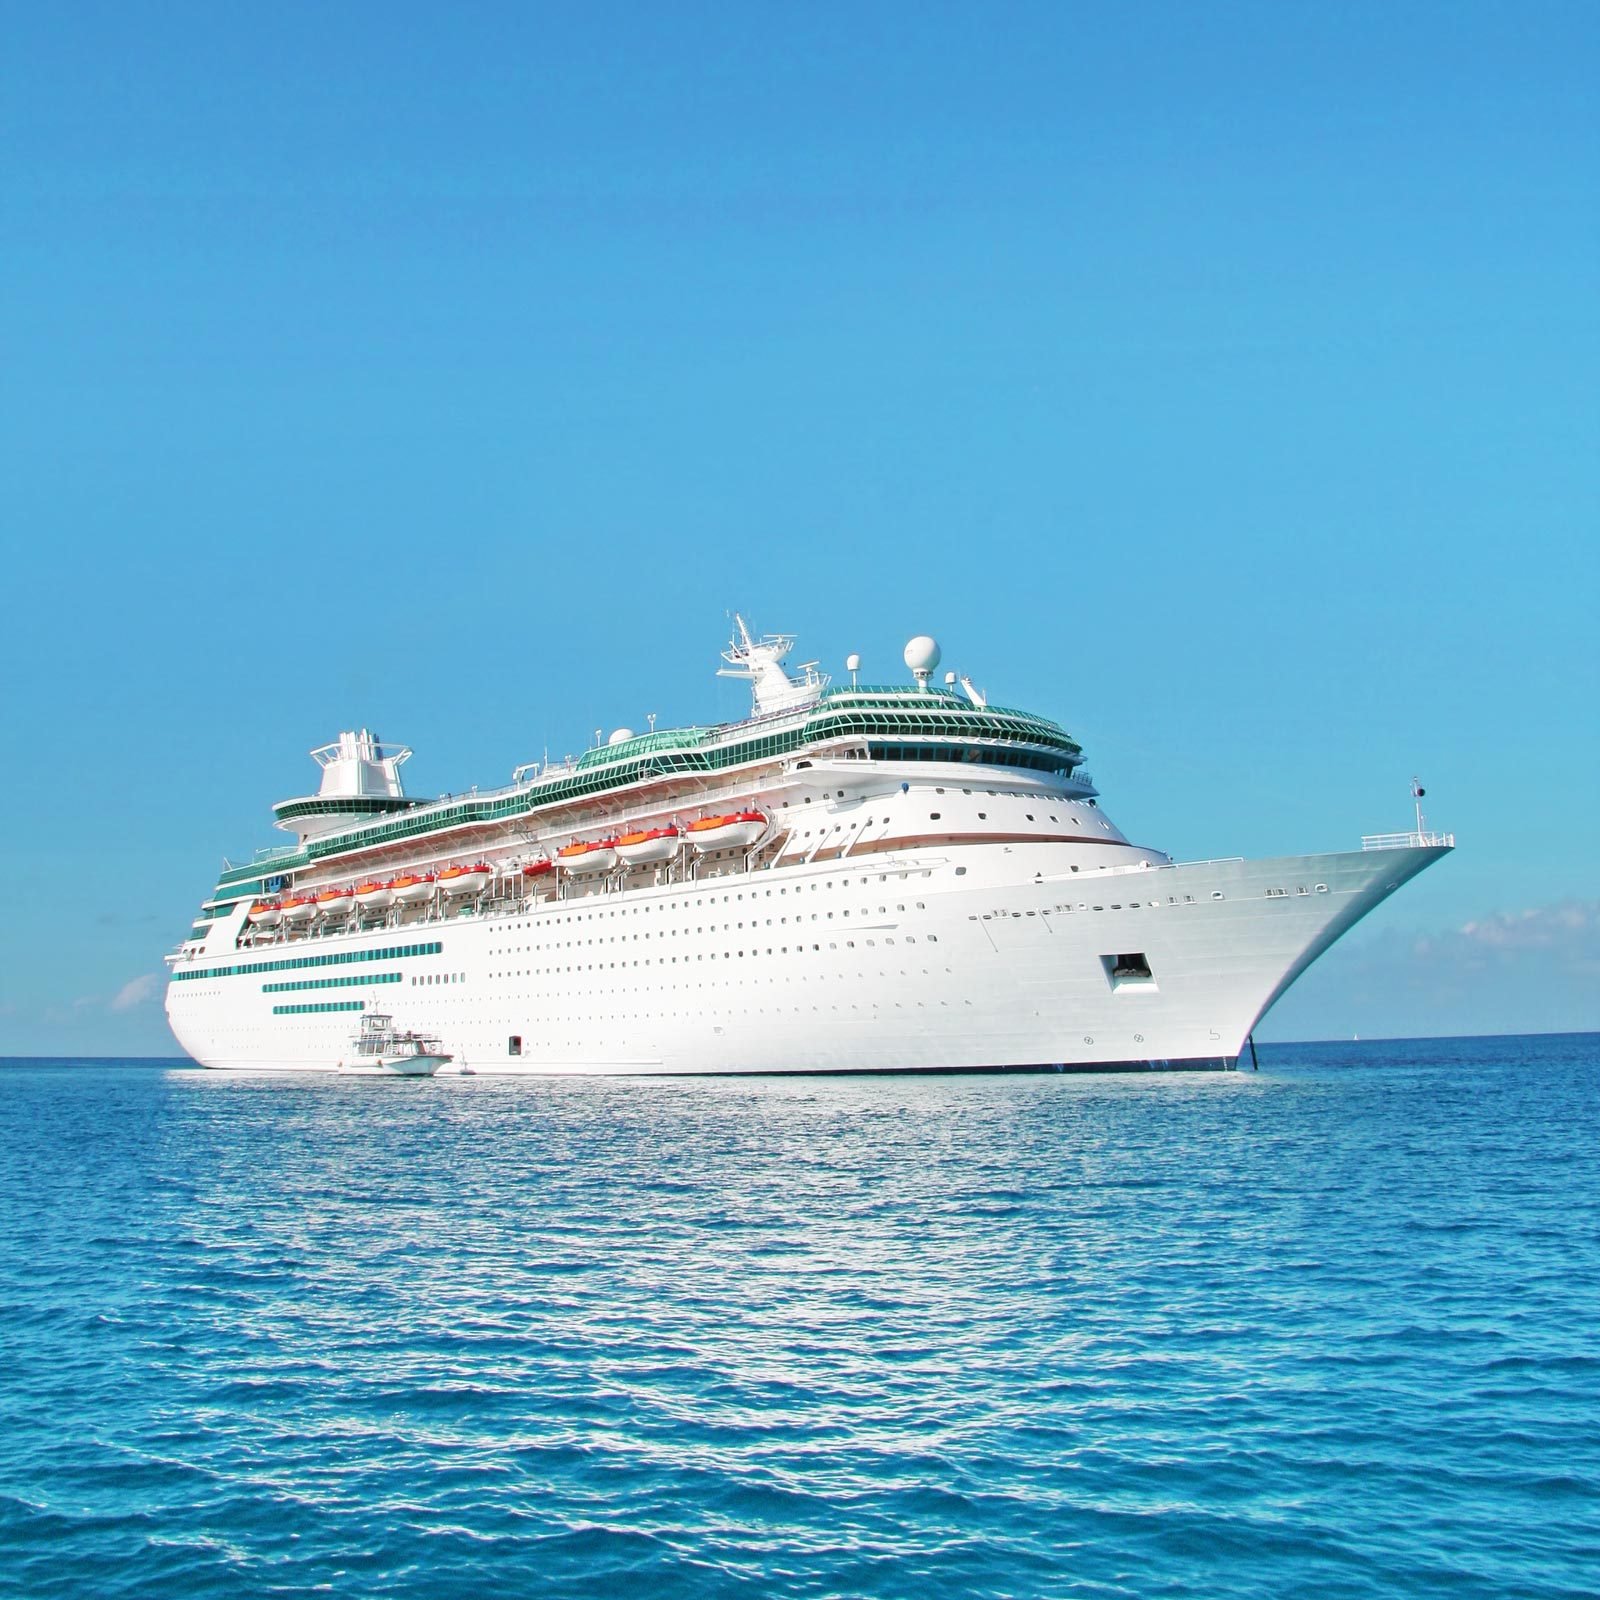 Things that can get you instantly kicked off a cruise ship